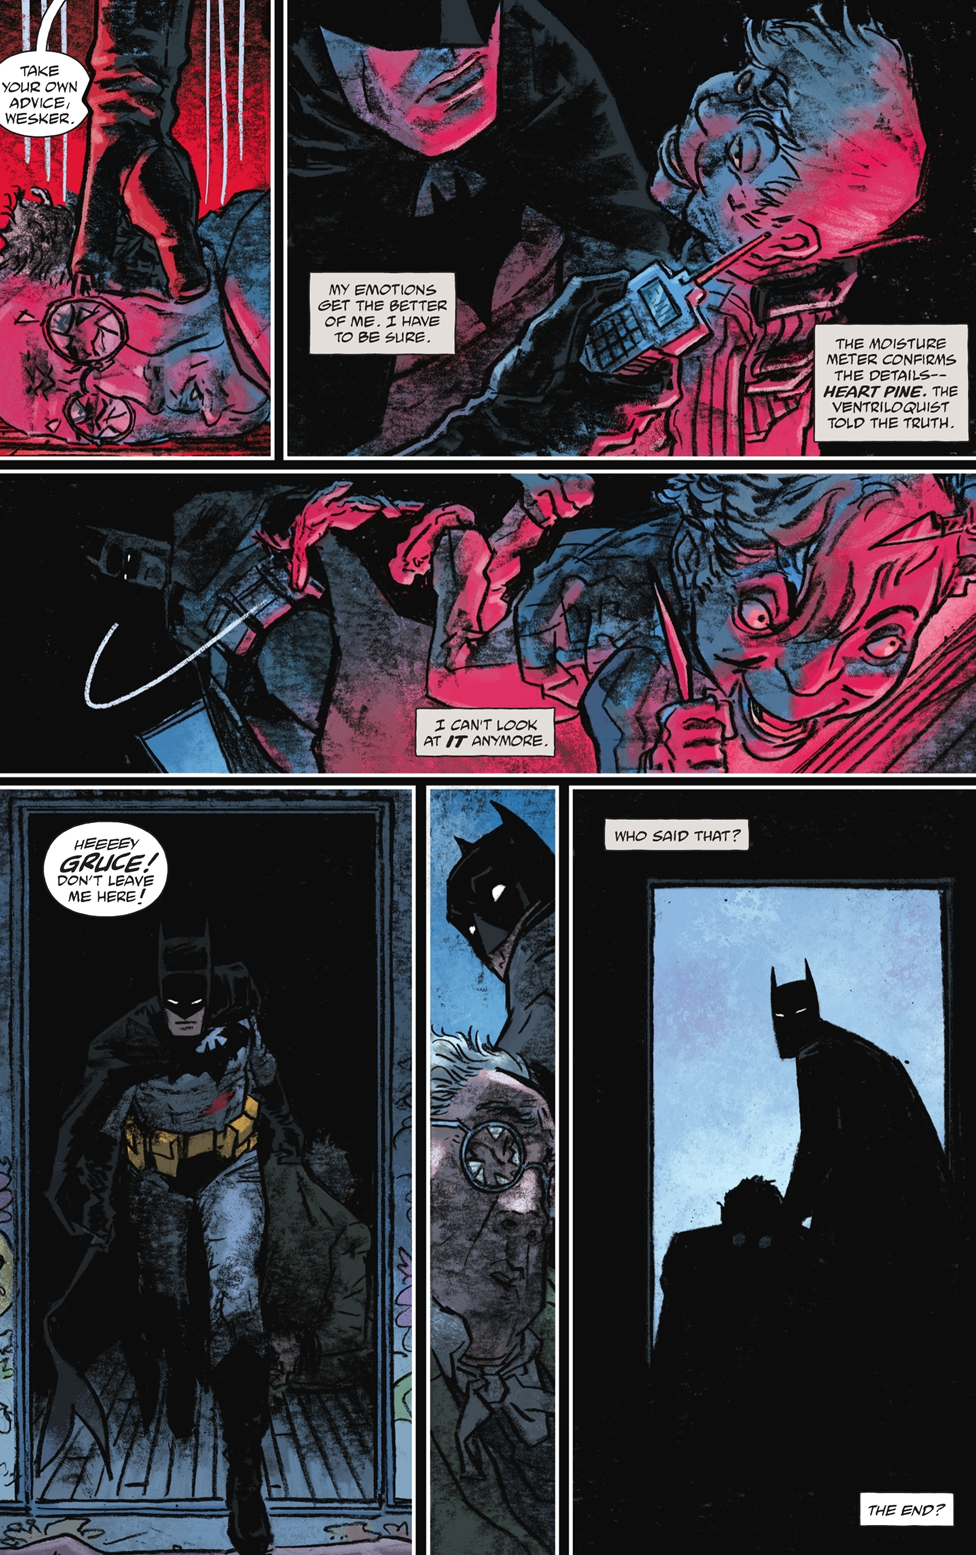 A blog dedicated to all your favorite moments — Batman: Urban Legends #19 -  “Tiny Hands in the...